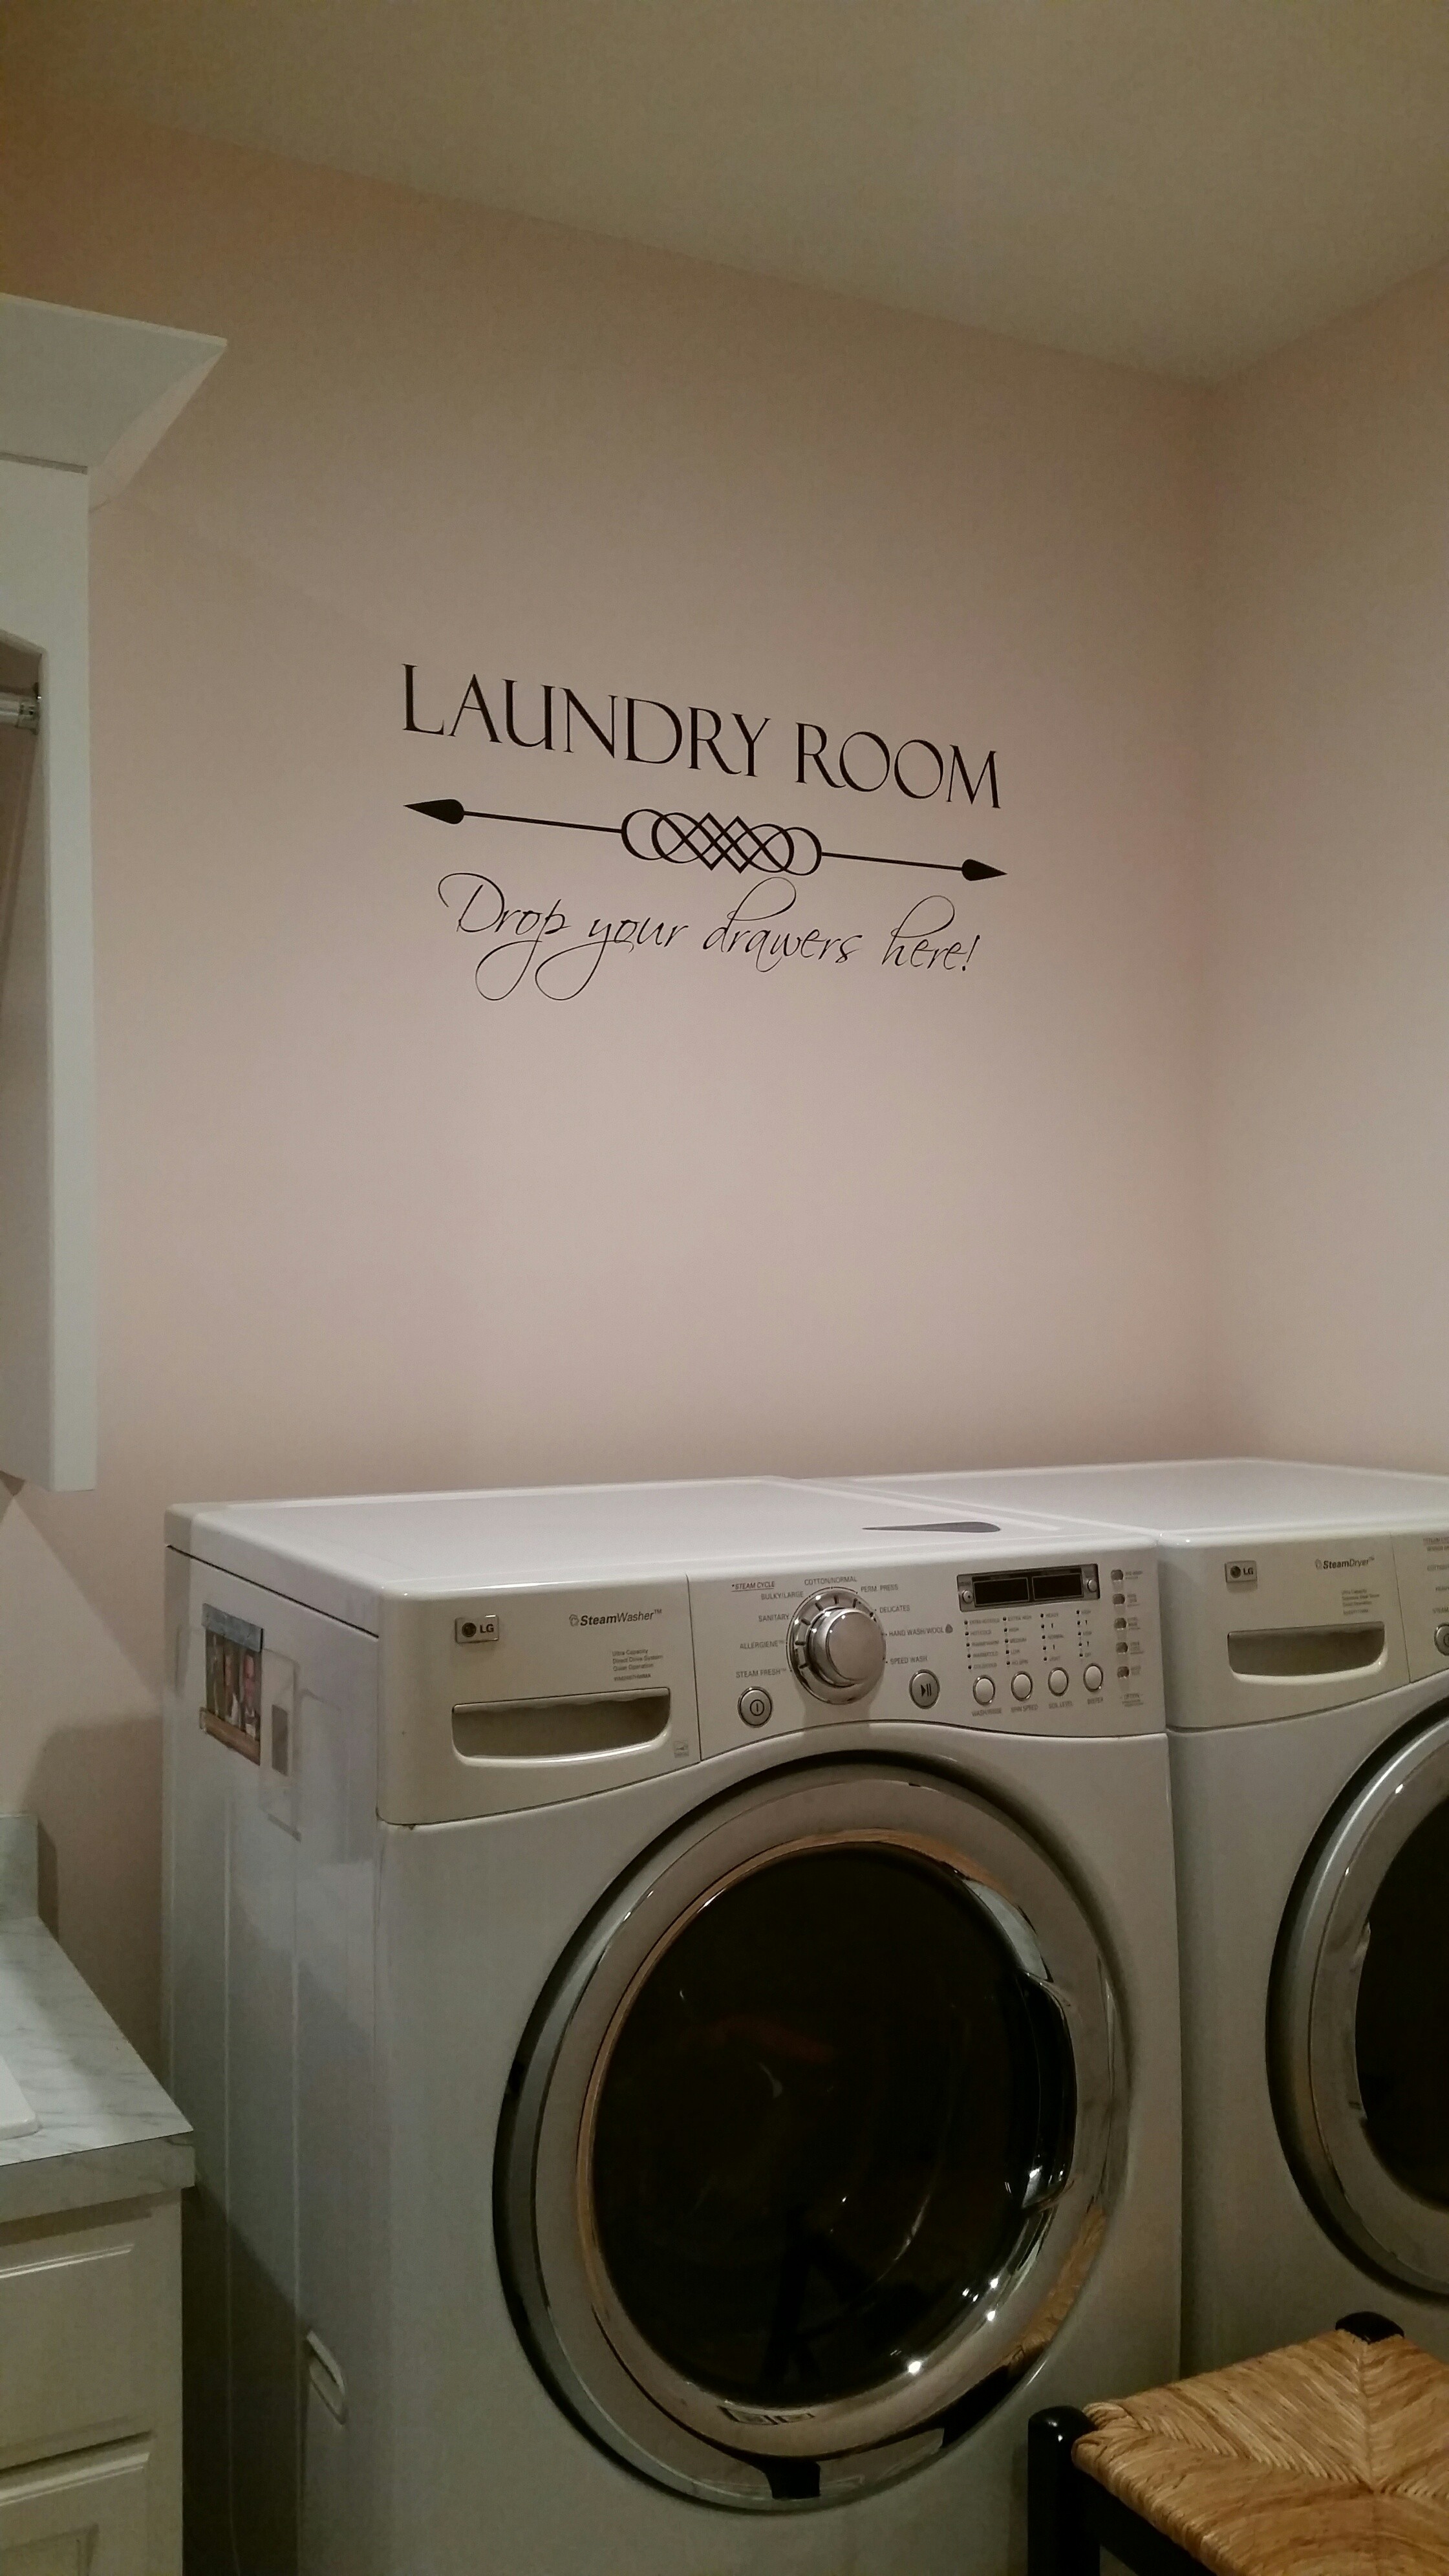 Laundry Room - Drop your drawers here!